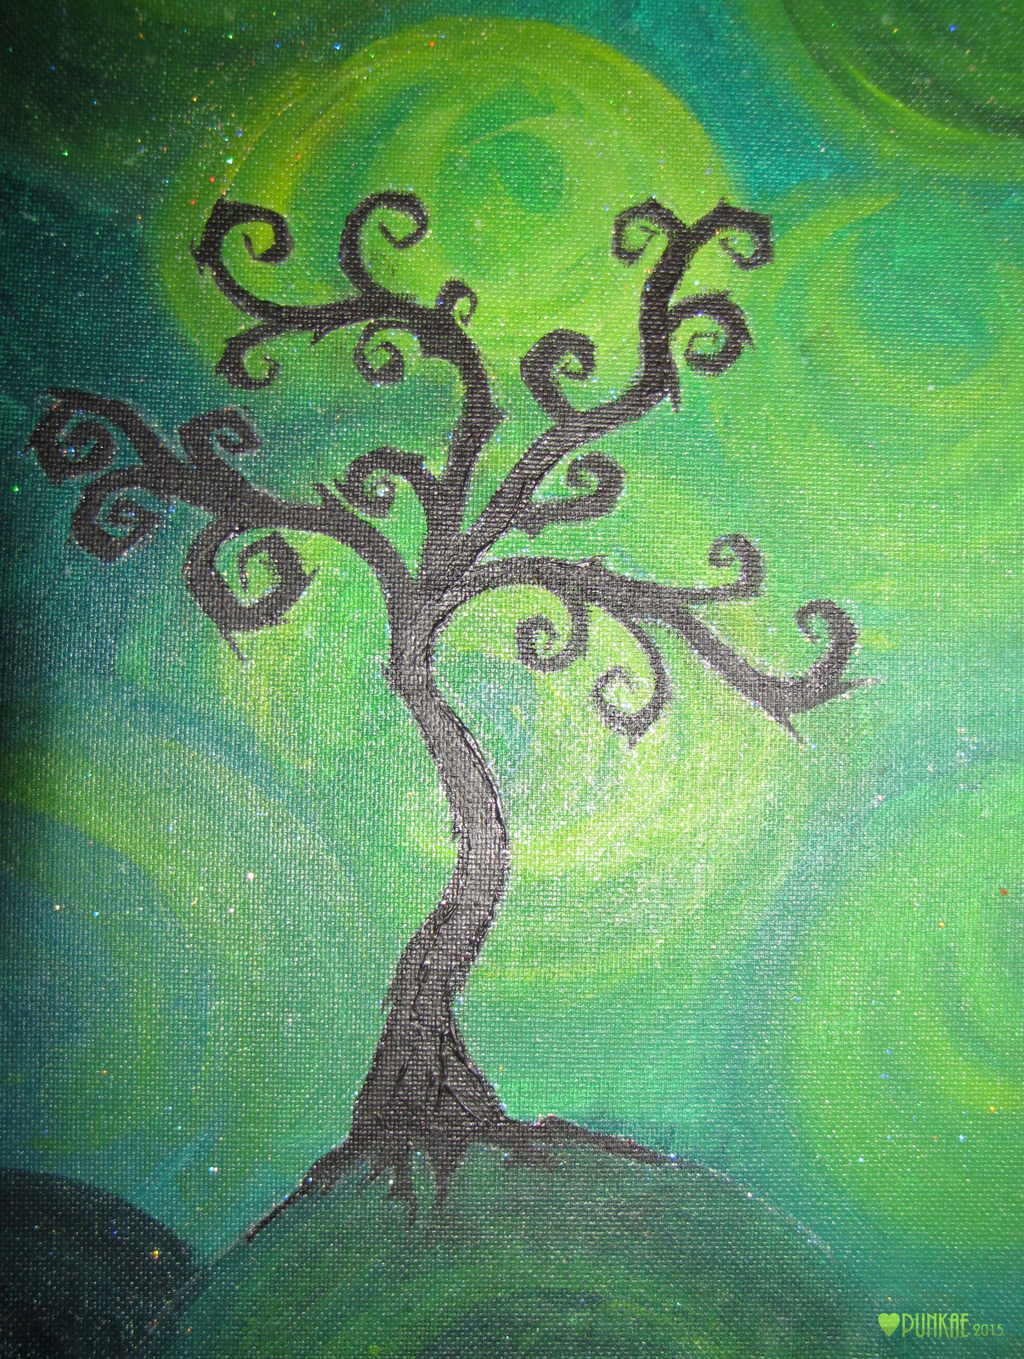 Most recent image: The Lone Tree